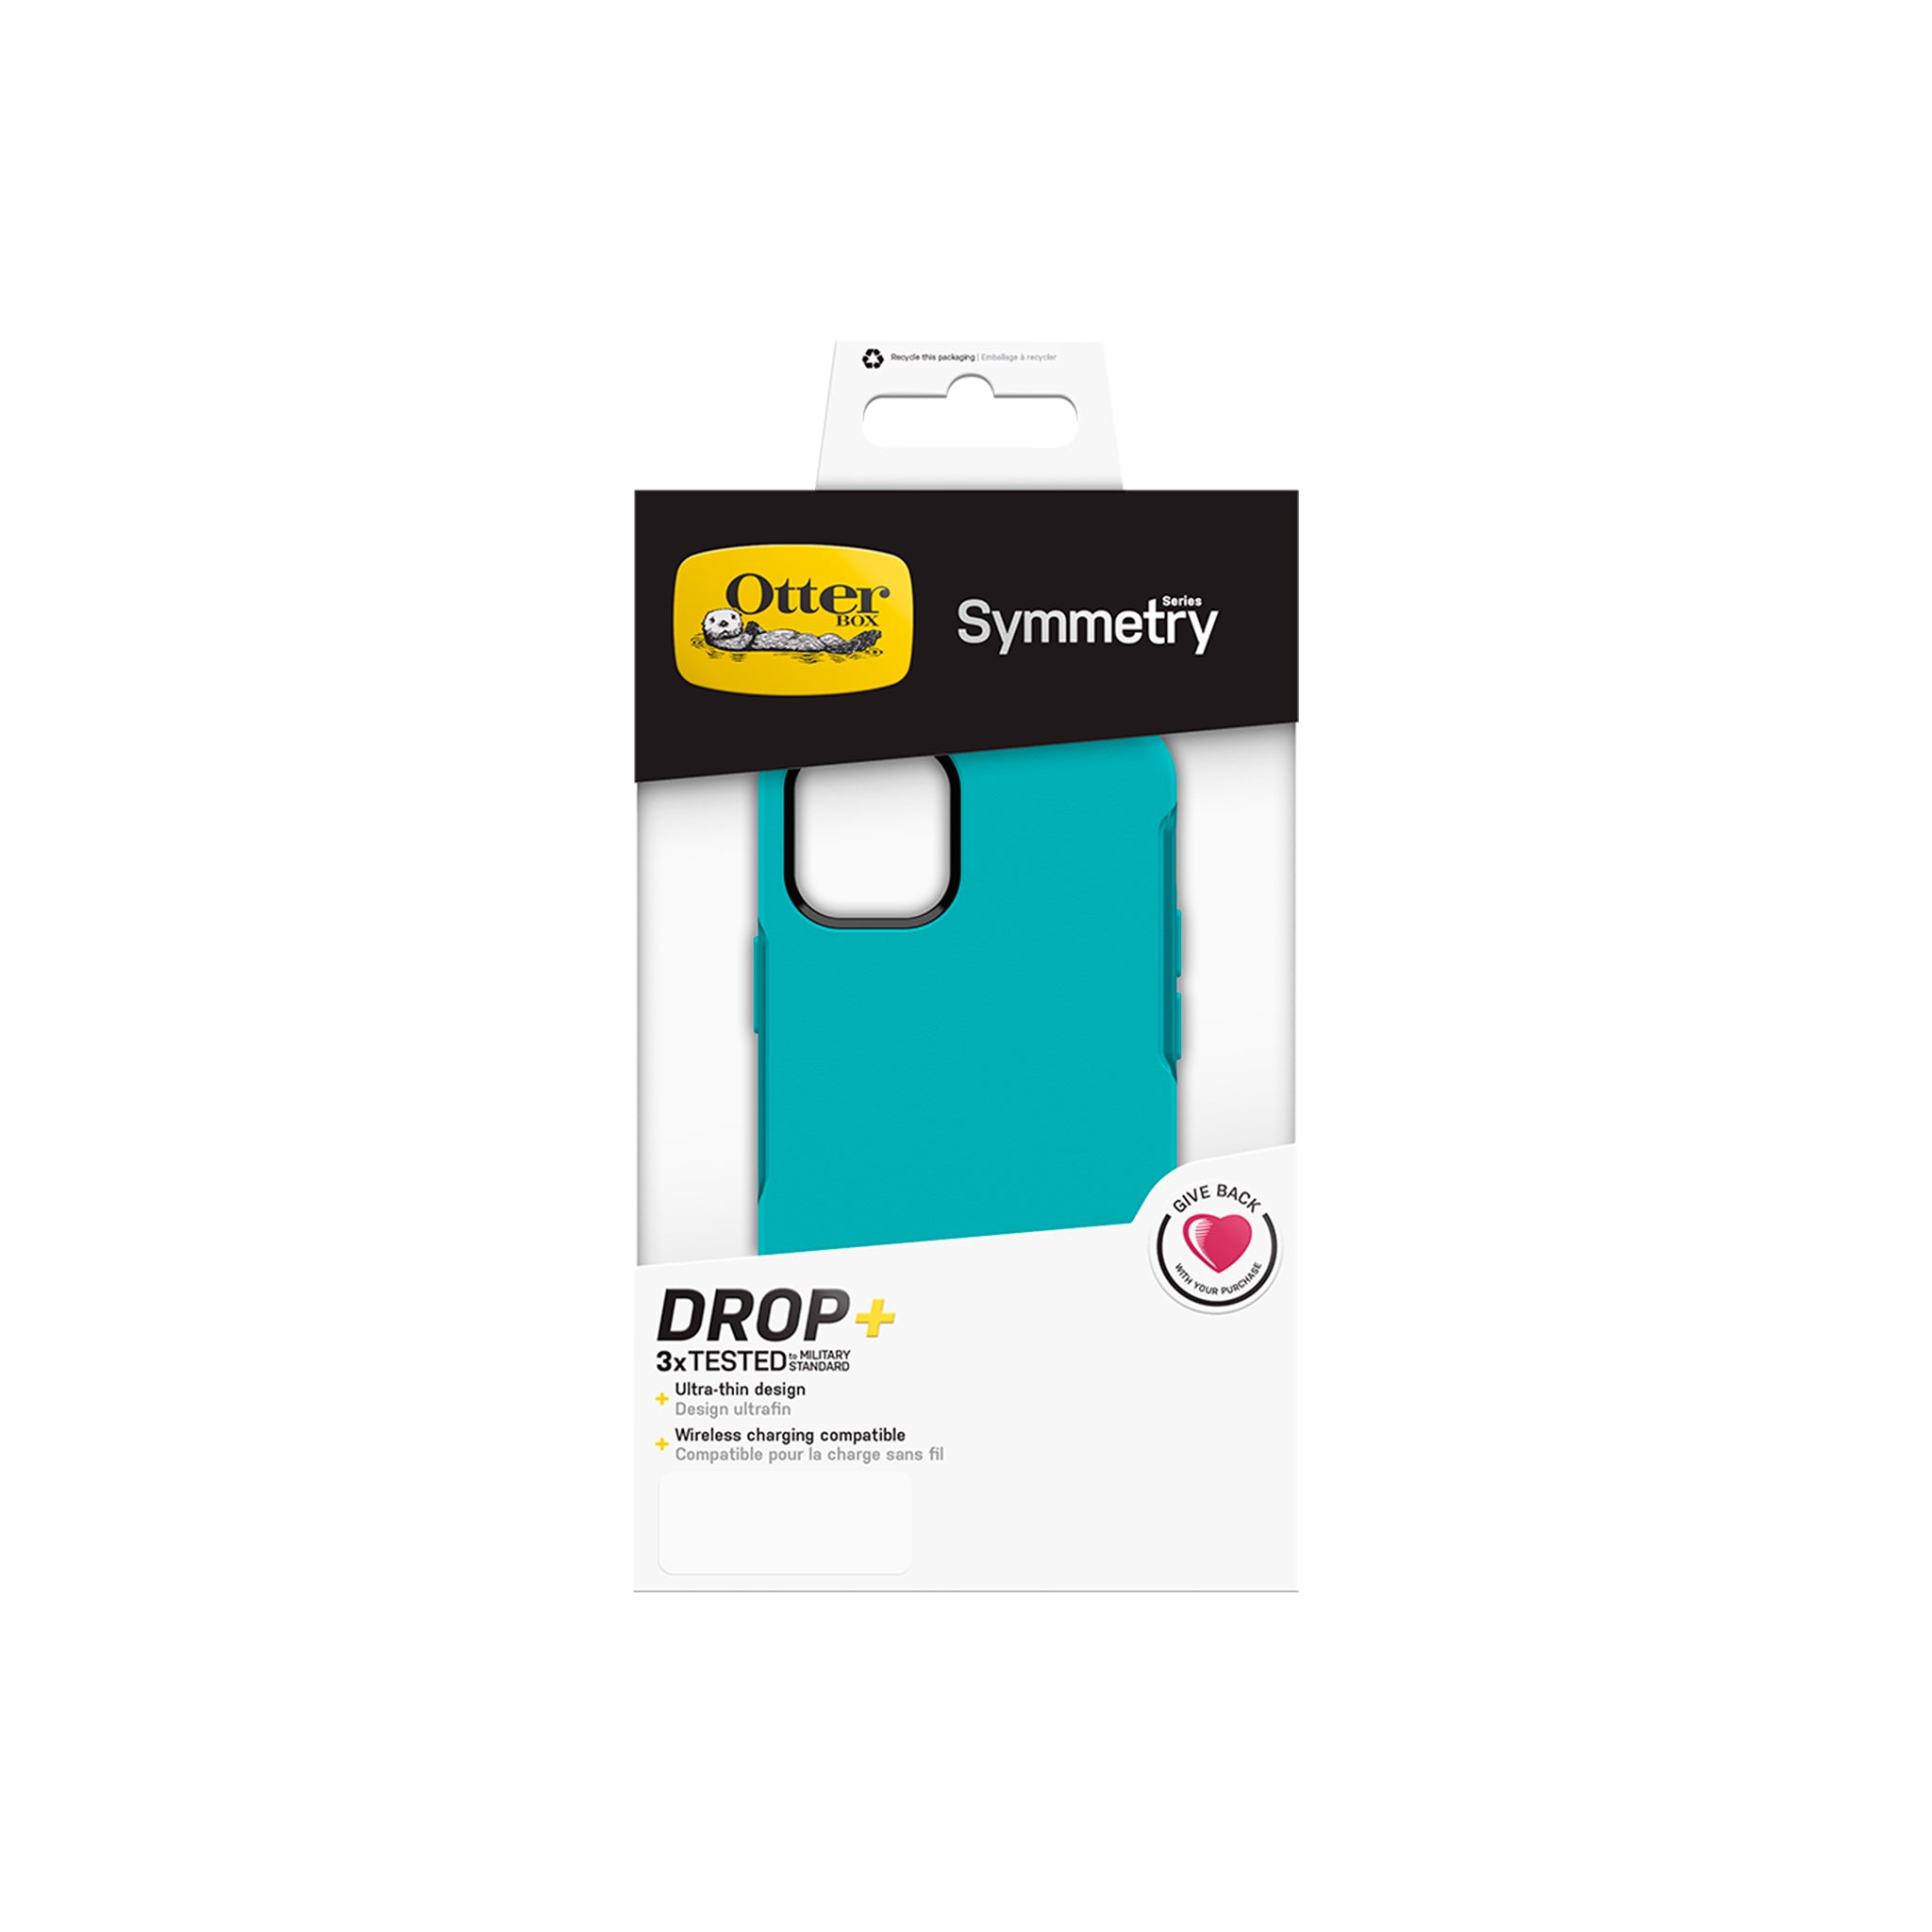 OtterBox - Symmetry for iPhone 12 mini - Rock Candy